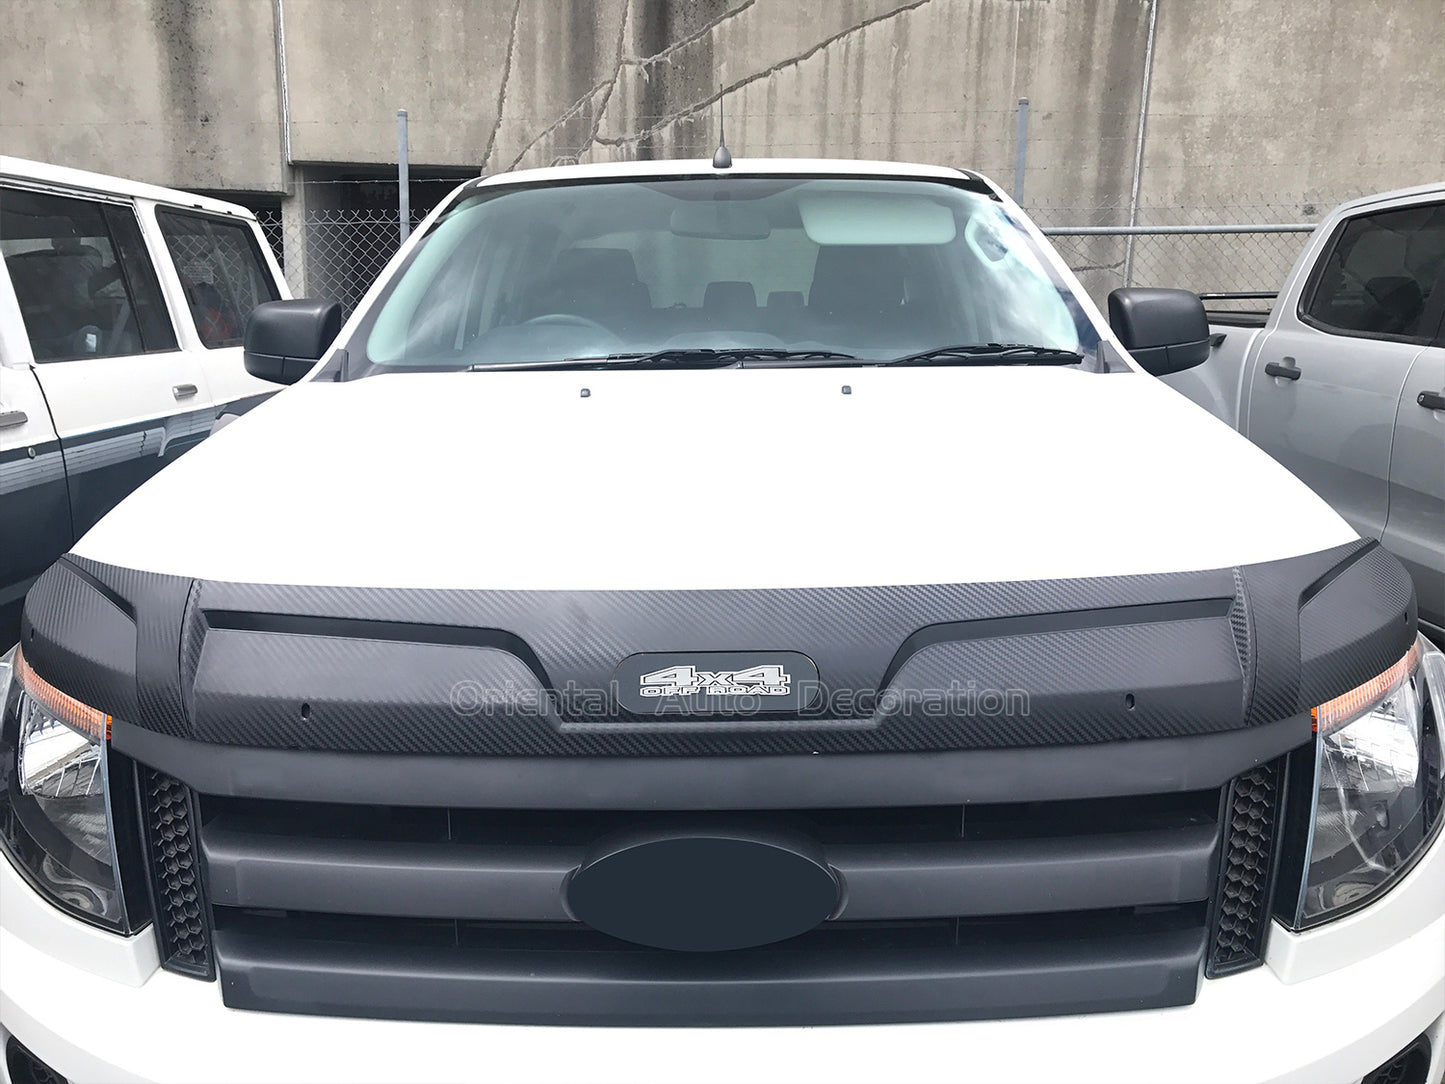 Injection modeling Exclusive Bonnet Protector Guard for Ford Ranger PX 2012-2015 Hood Protector Bonnet Guard